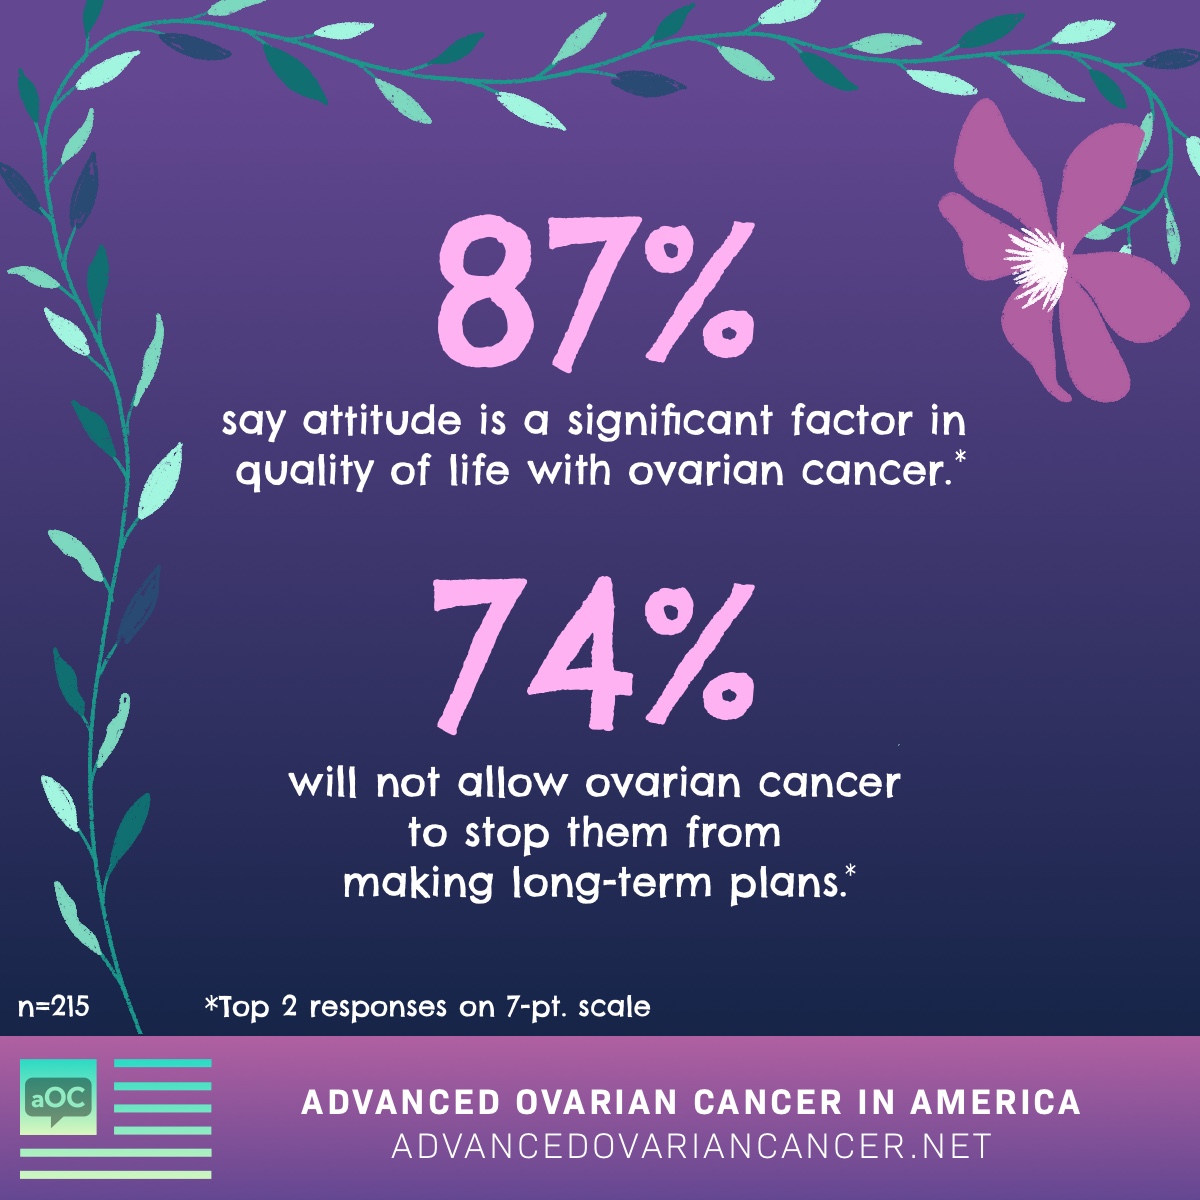 87% say attitude is a significant factor in quality of life with ovarian cancer. 74% will not allow ovarian cancer to stop them from making long-term plans.